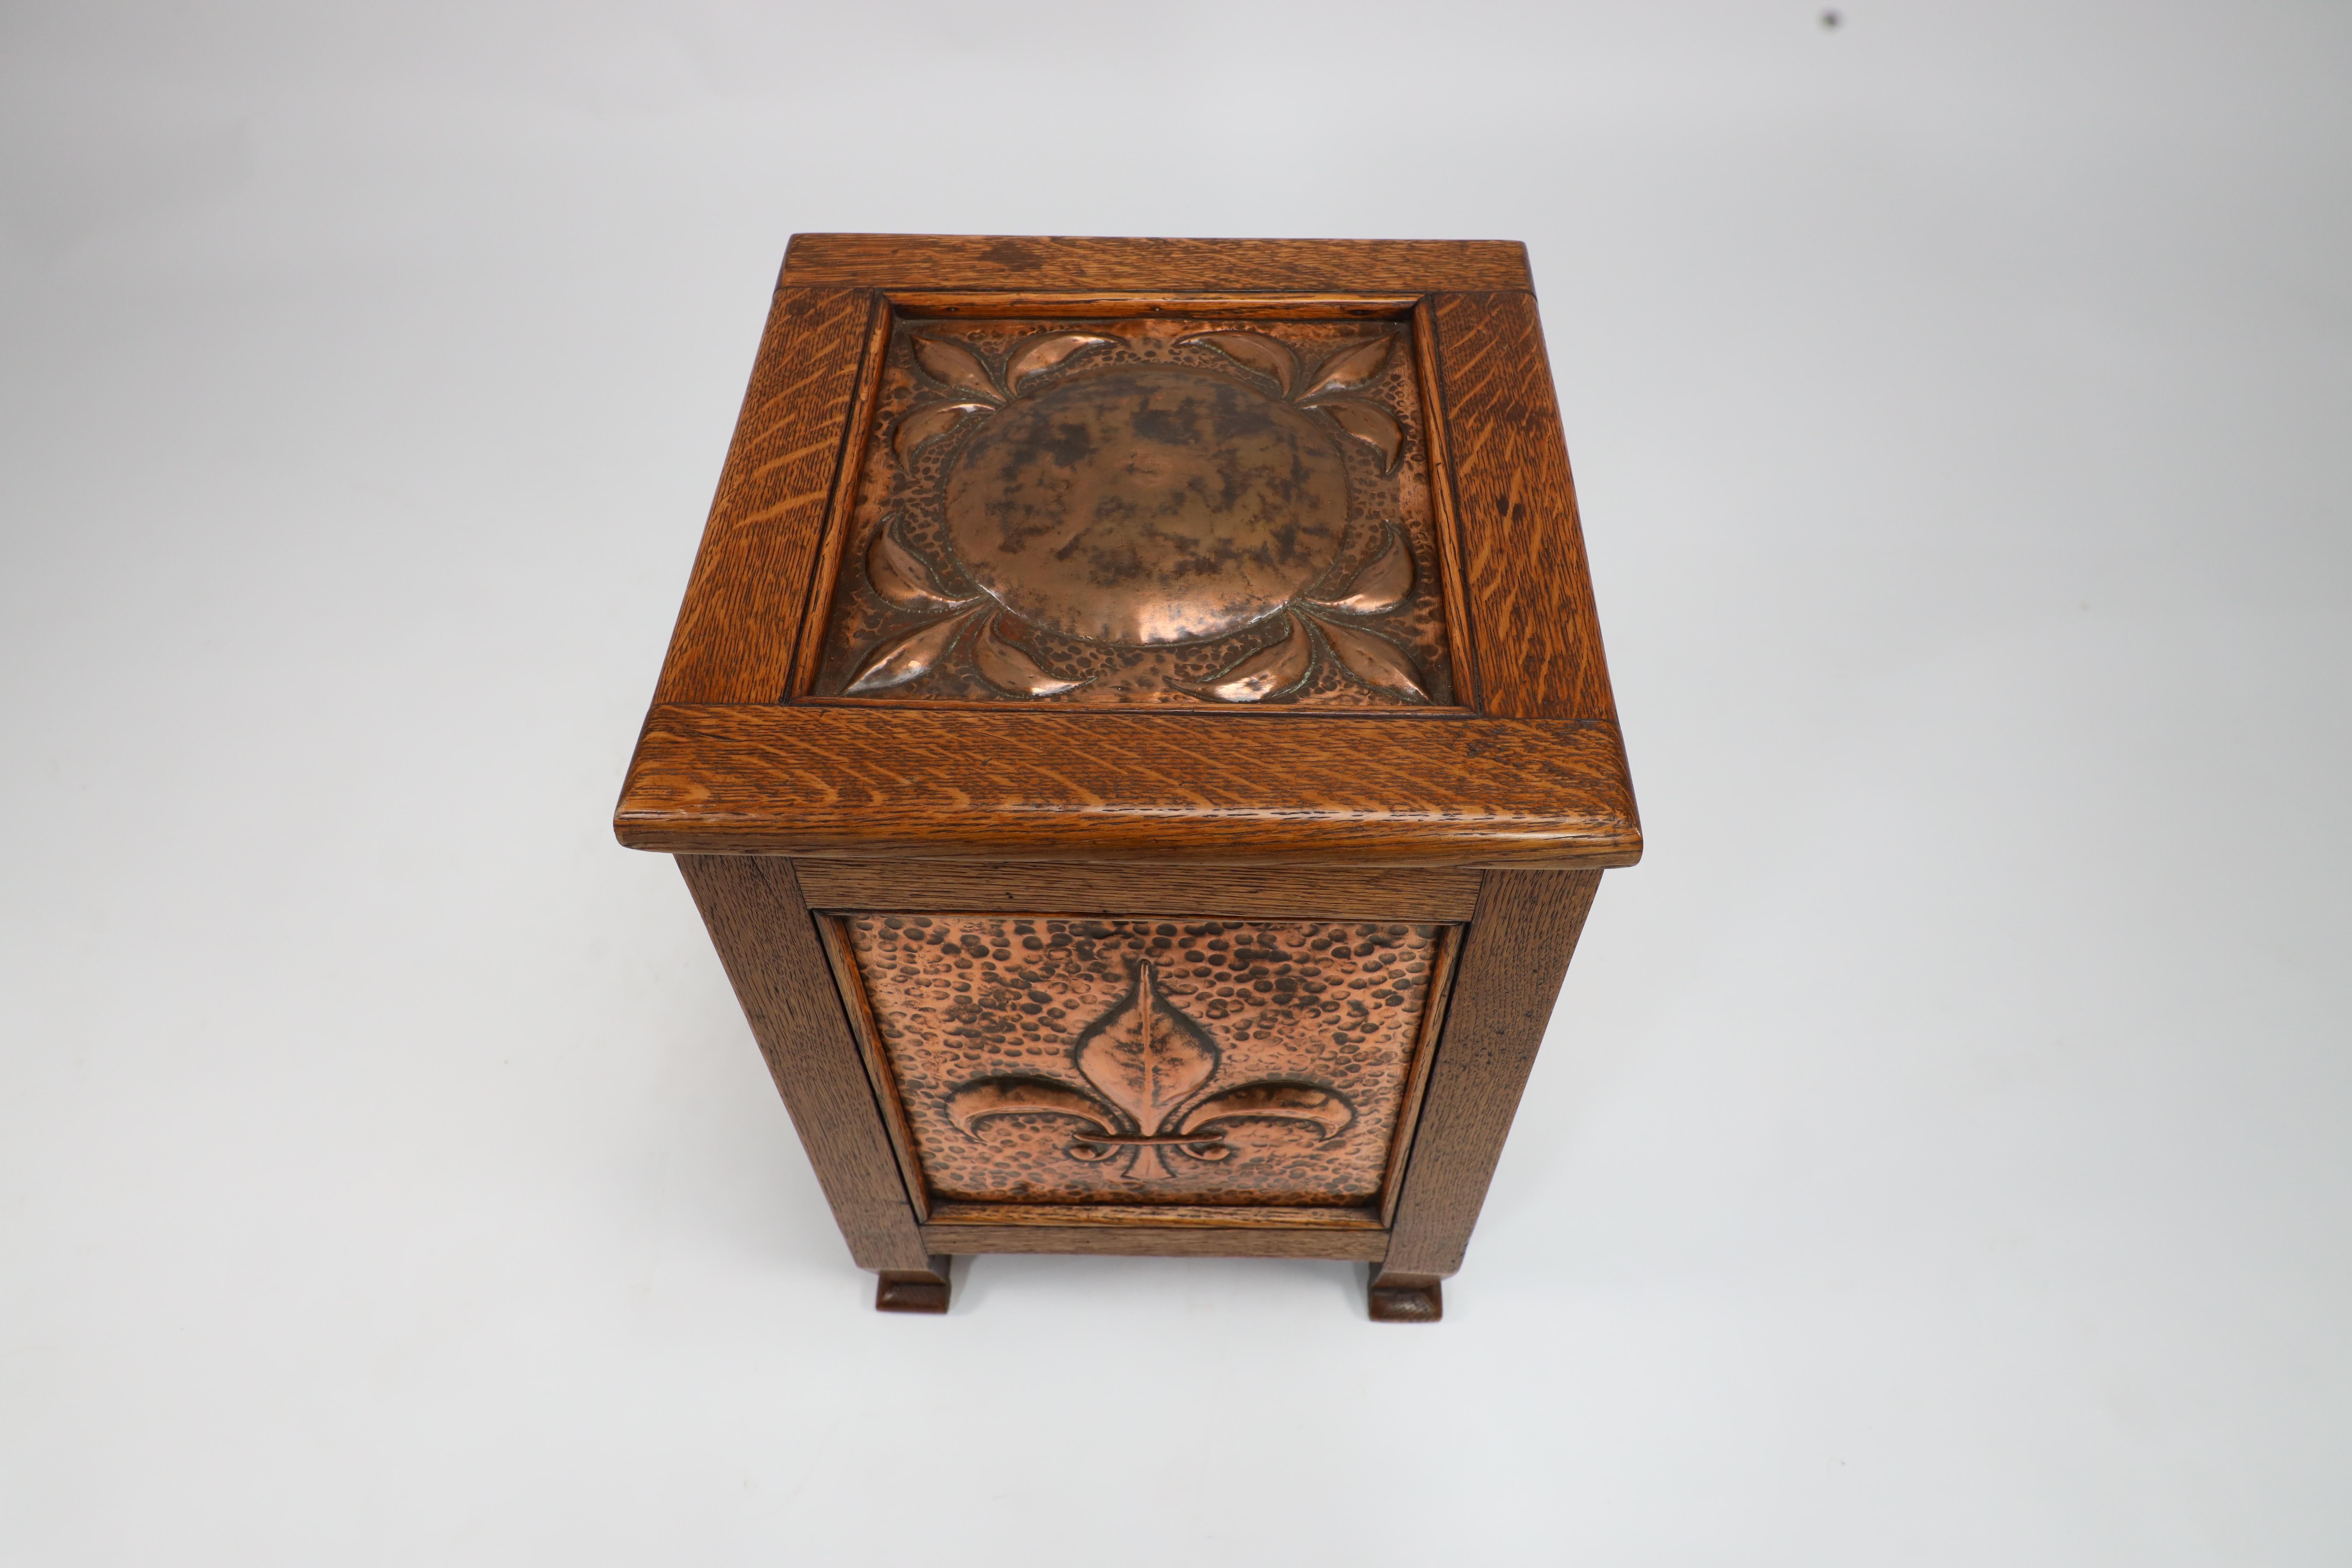 John Pearson attri. An Arts and Crafts log or coal box with Fleur De Lys details For Sale 1